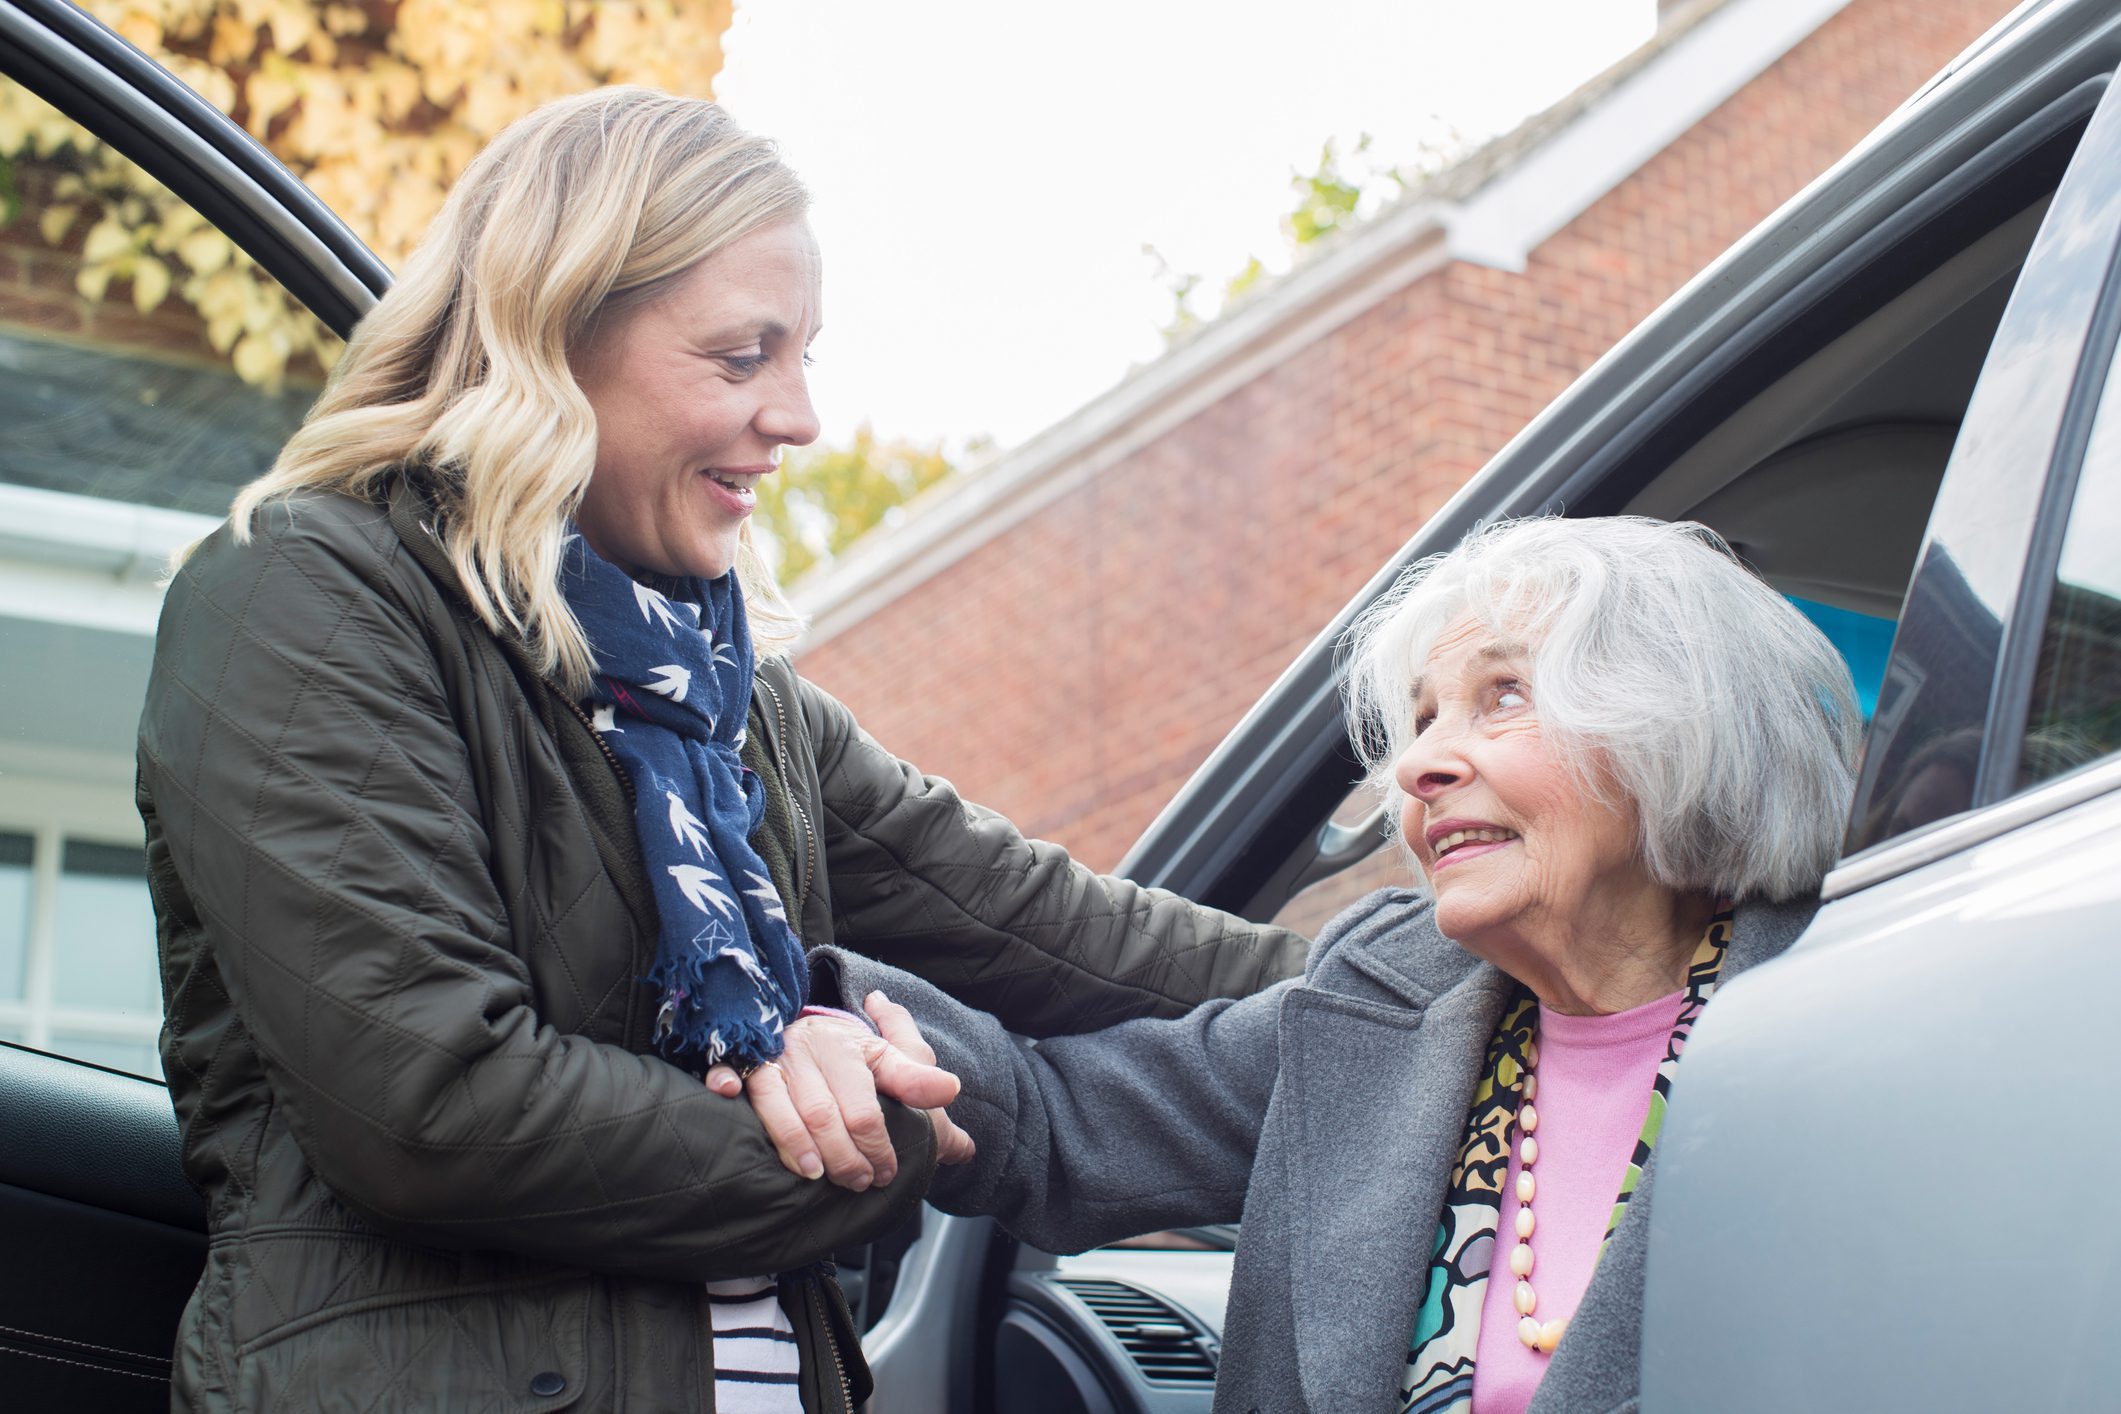 Attractive Woman Helping Senior Woman a Lift in a Car